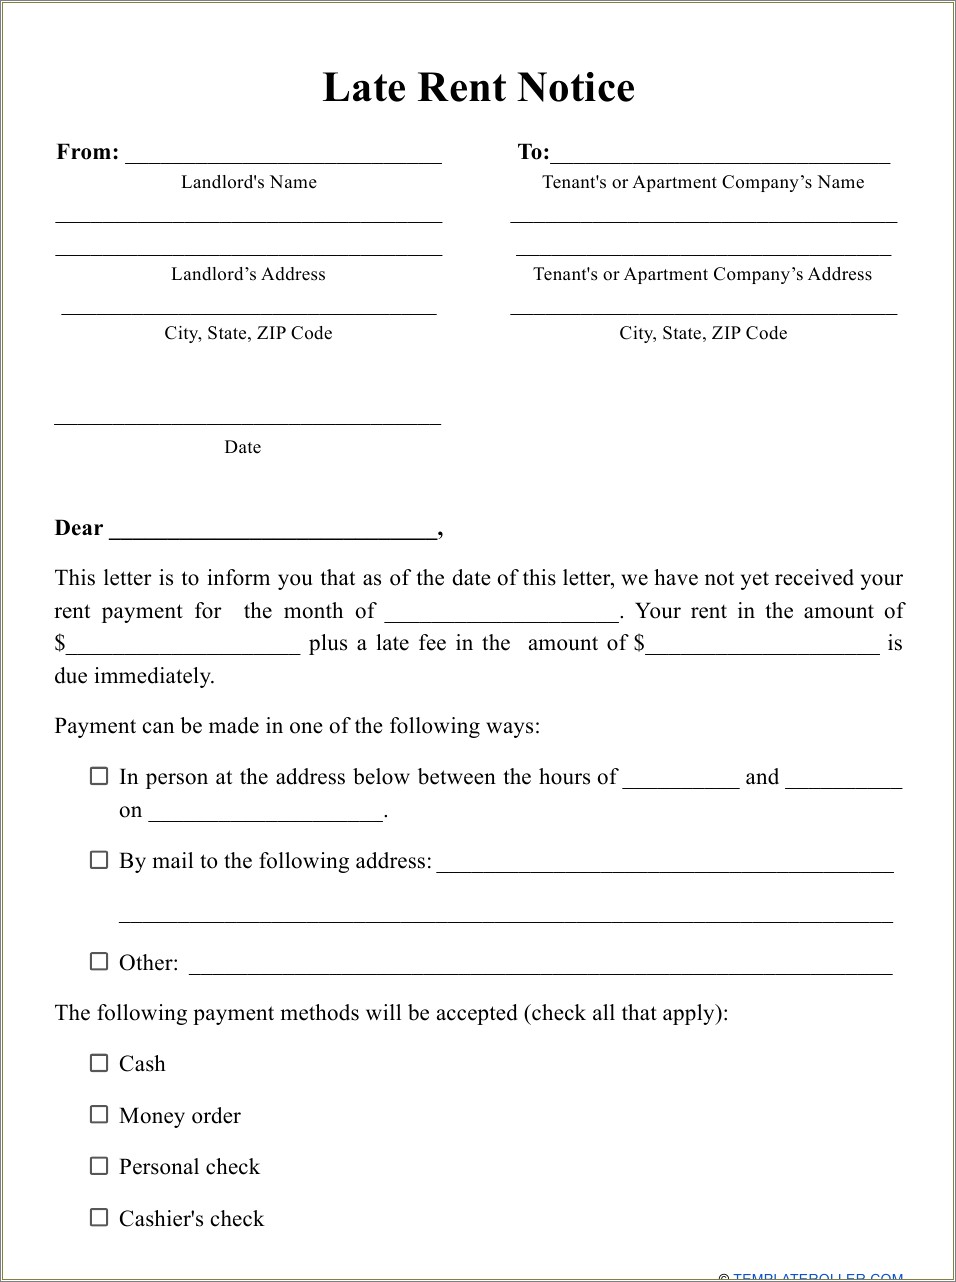 Free Template From Renter To Landlords Late Rent